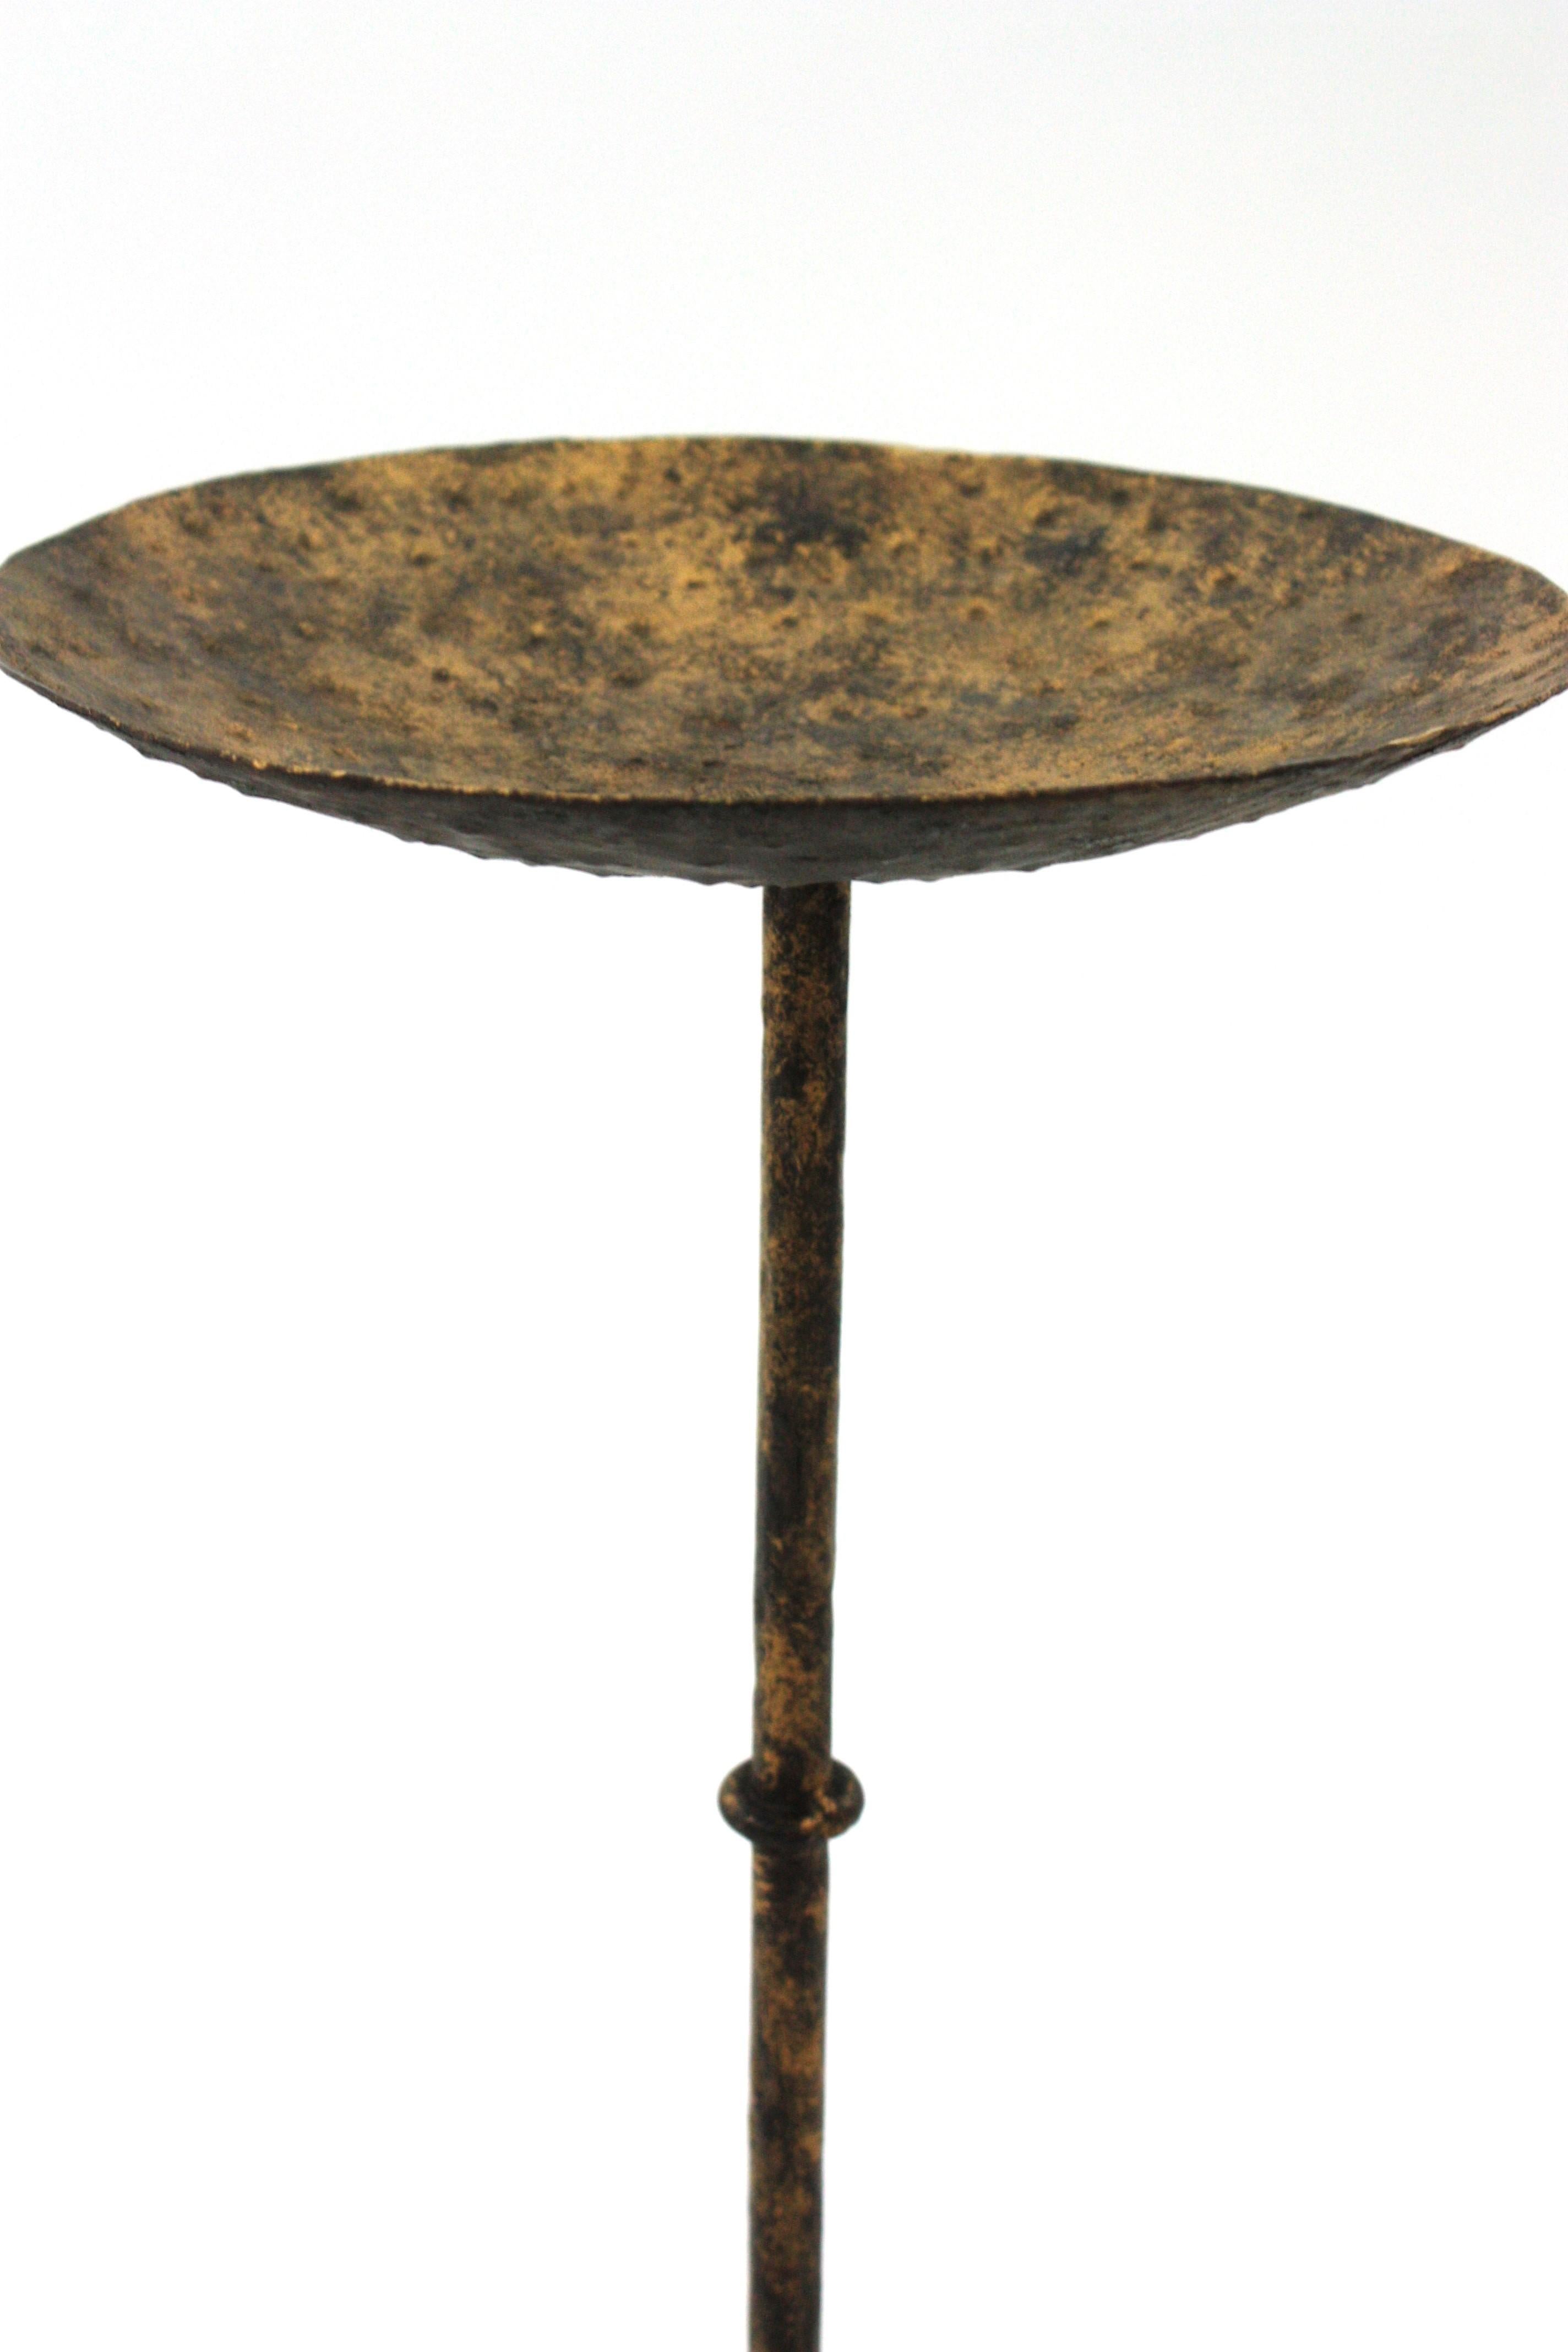 Spanish Drinks Table / Side Table / Martini Table in Gilt Iron, 1940s For Sale 2